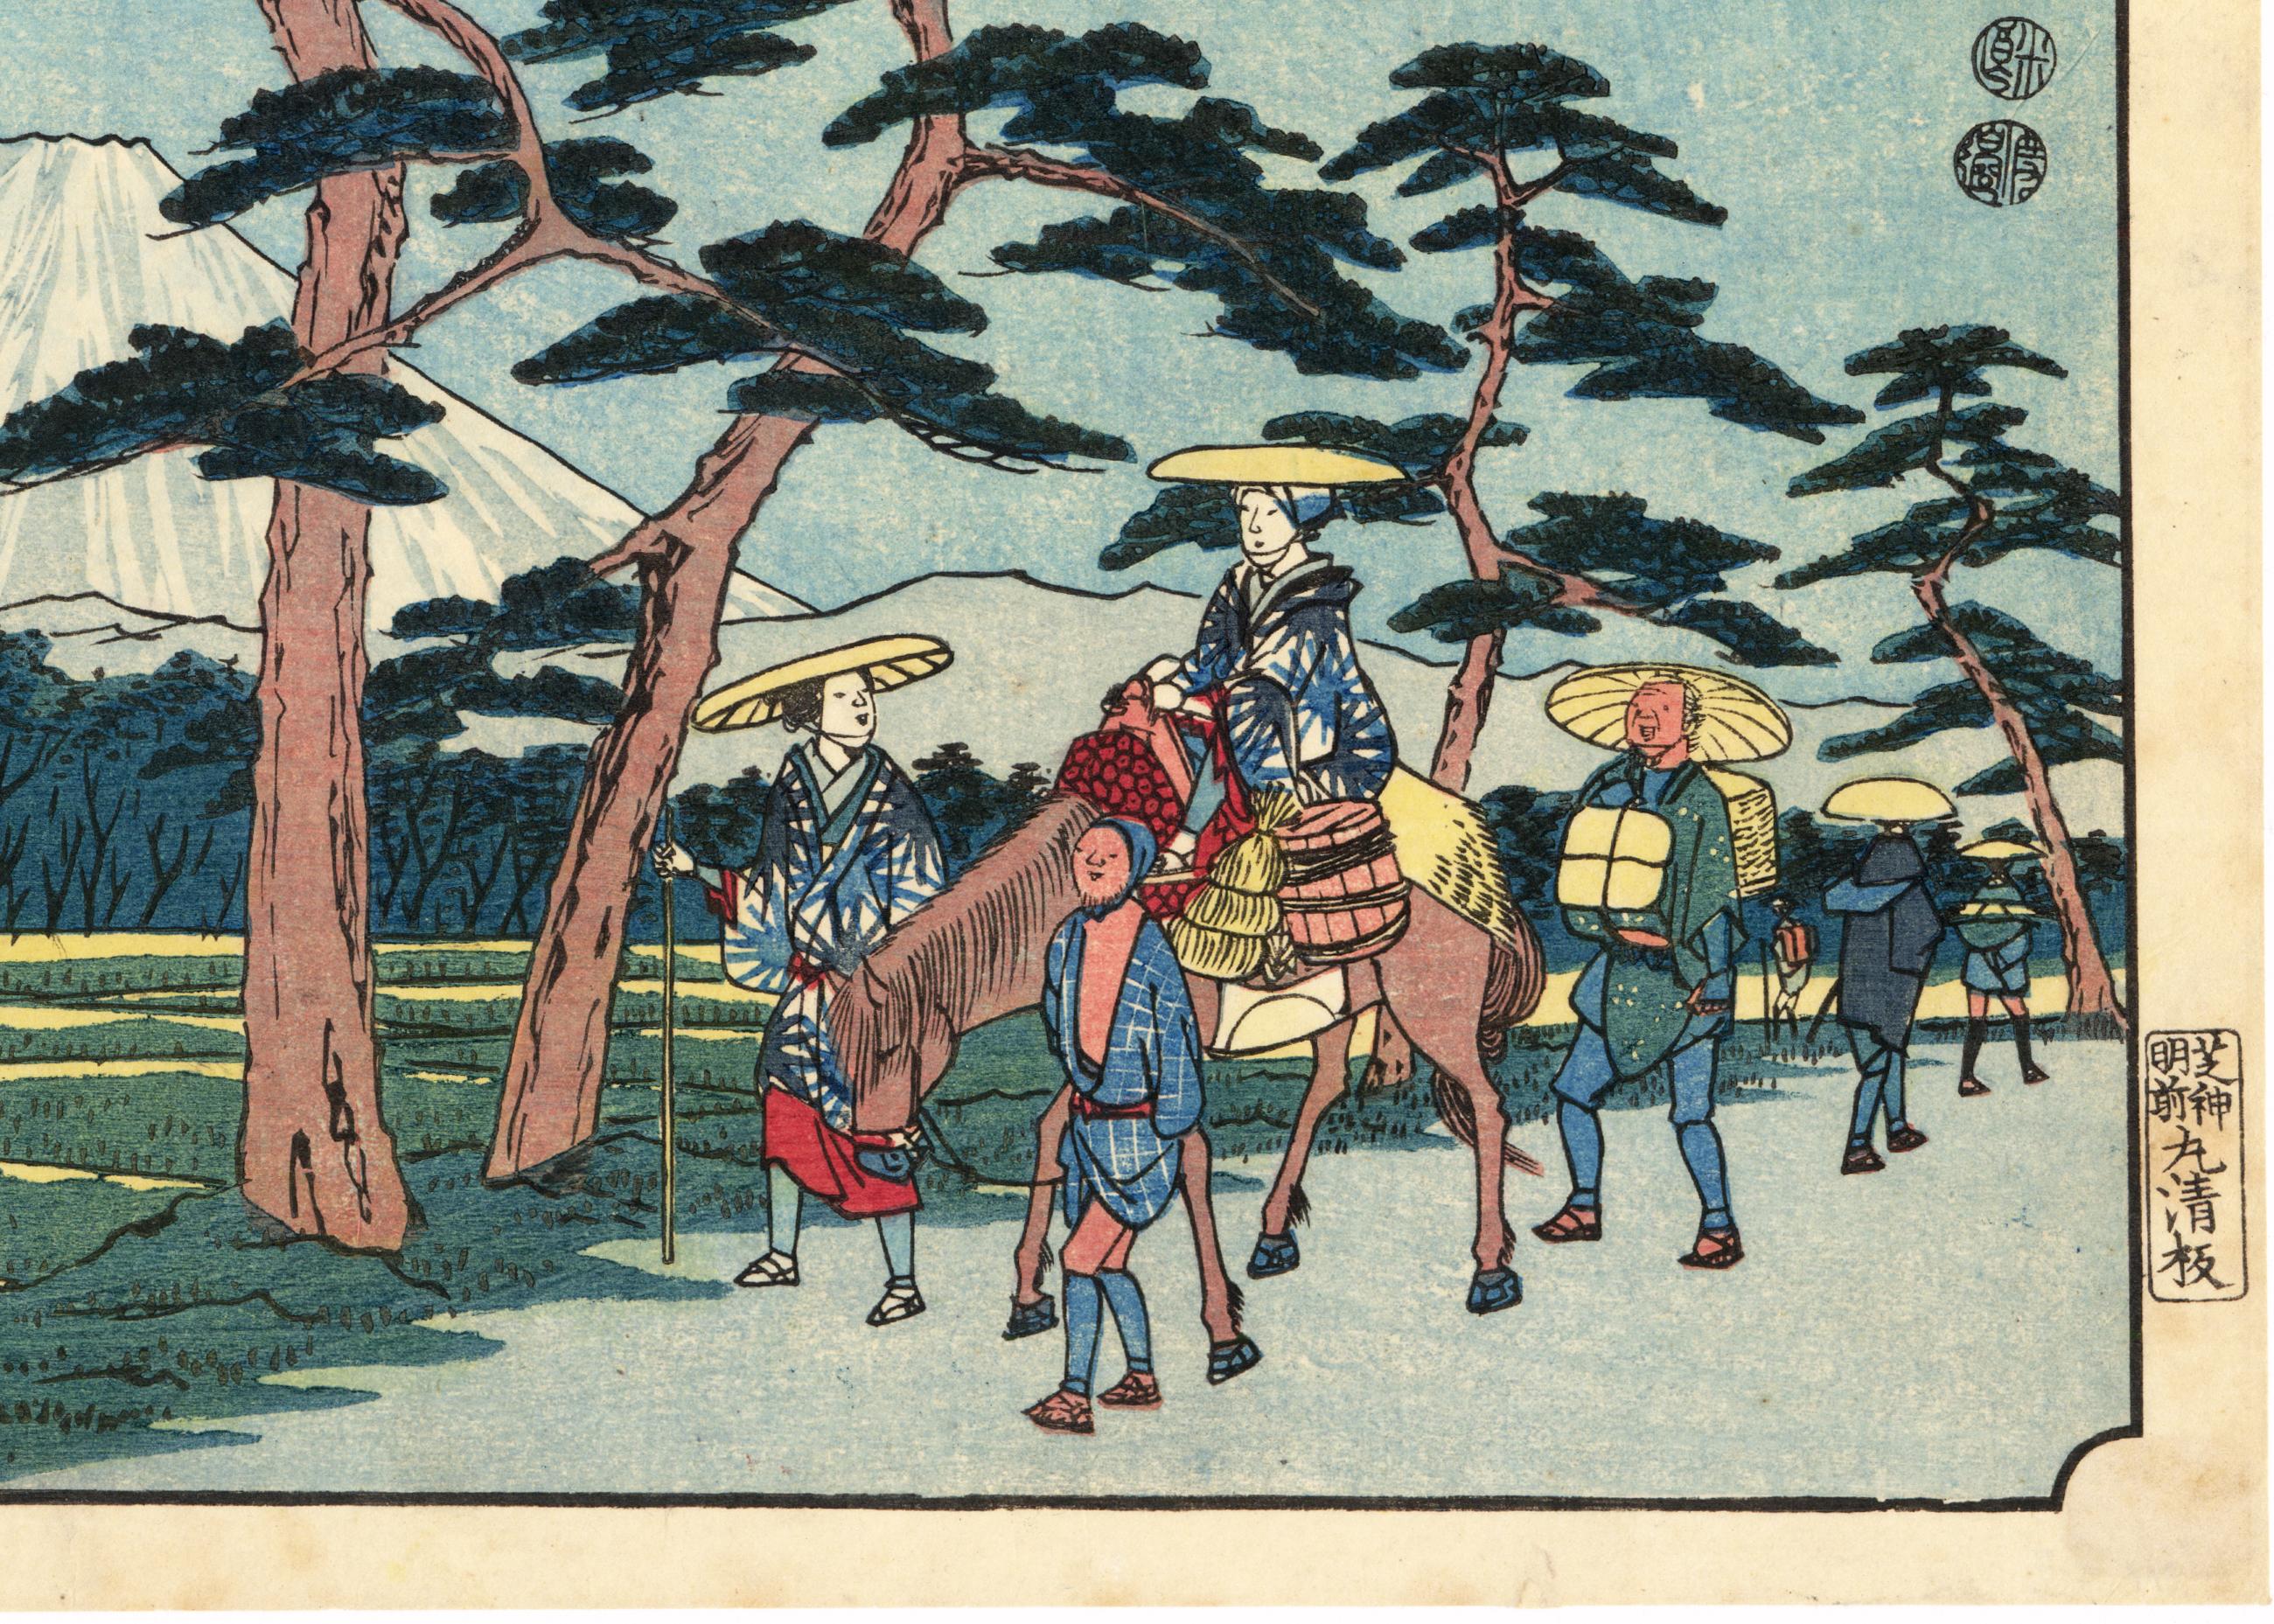 A woman on horseback and her companions pass beneath the pine trees on the Tokaido Road. Behind them a beautiful Mt. Fuji rises, perfect as ever. The full title is: “Number 15, Yoshiwara: the Famous Sight of Mount Fuji on the Left” (Yoshiwara,